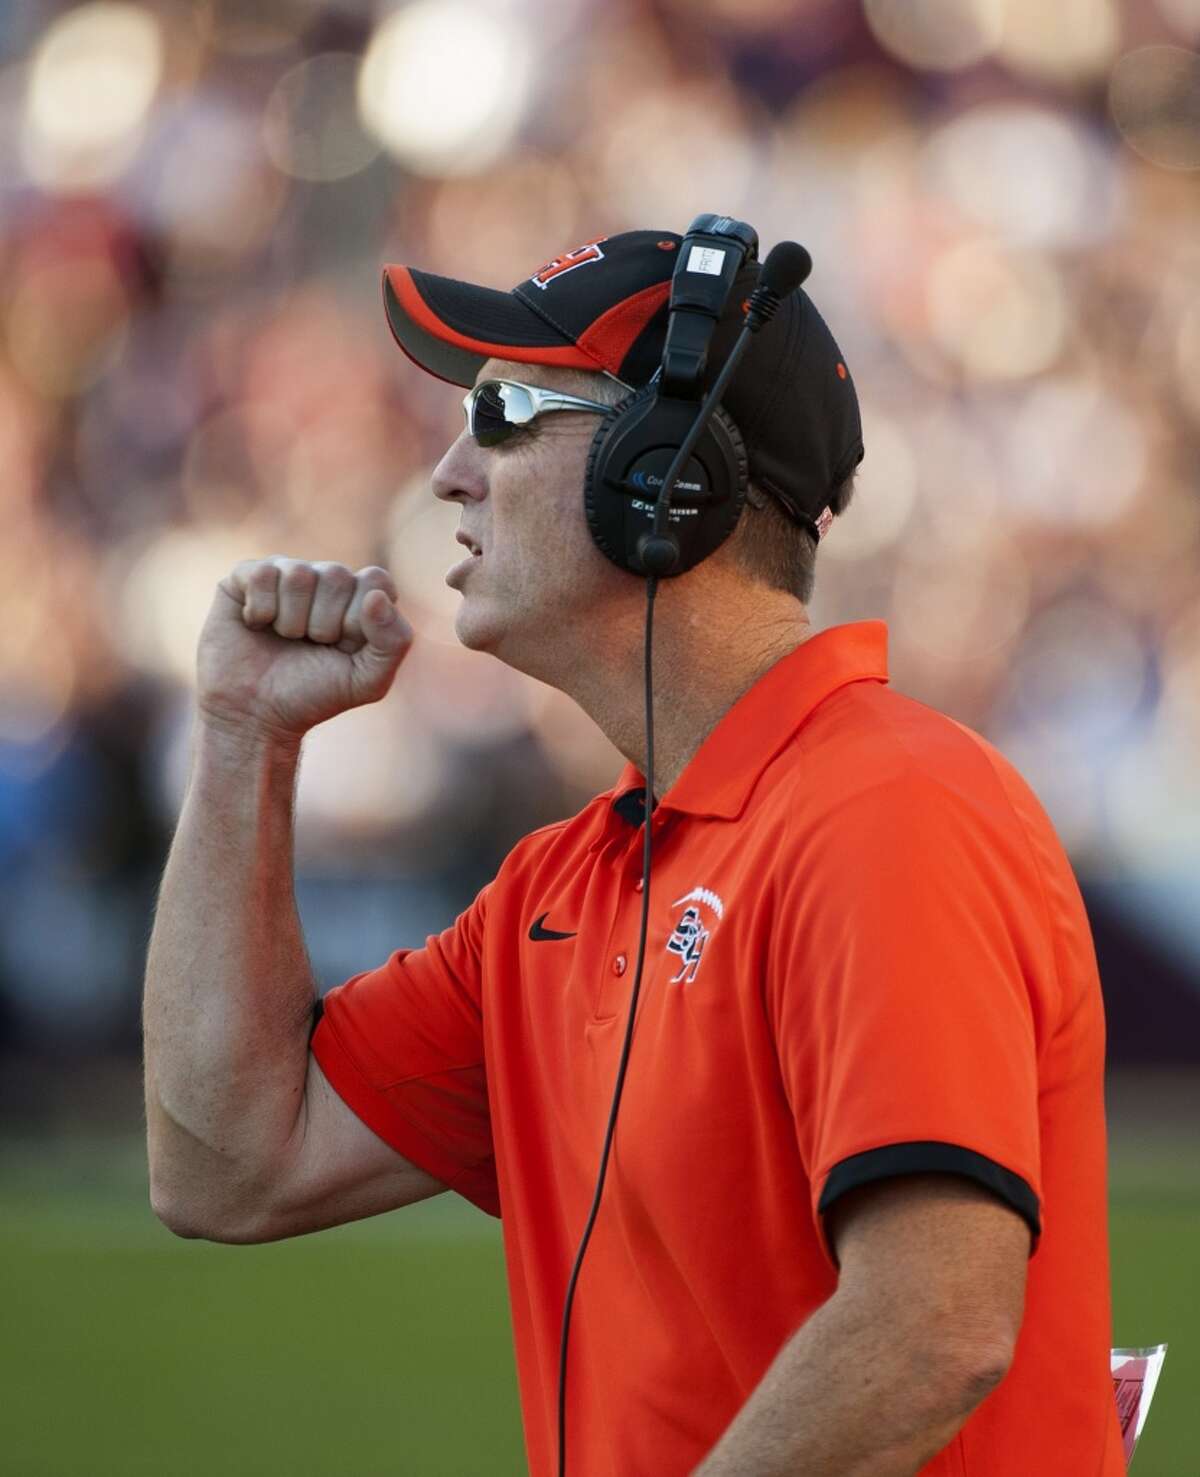 Sam Houston State head coach Willie Fritz reacts after a play during the second quarter of an NCAA college football game against Texas A&M, Saturday, Nov. 17, 2012, in College Station, Texas. (Dave Einsel / Associated Press)